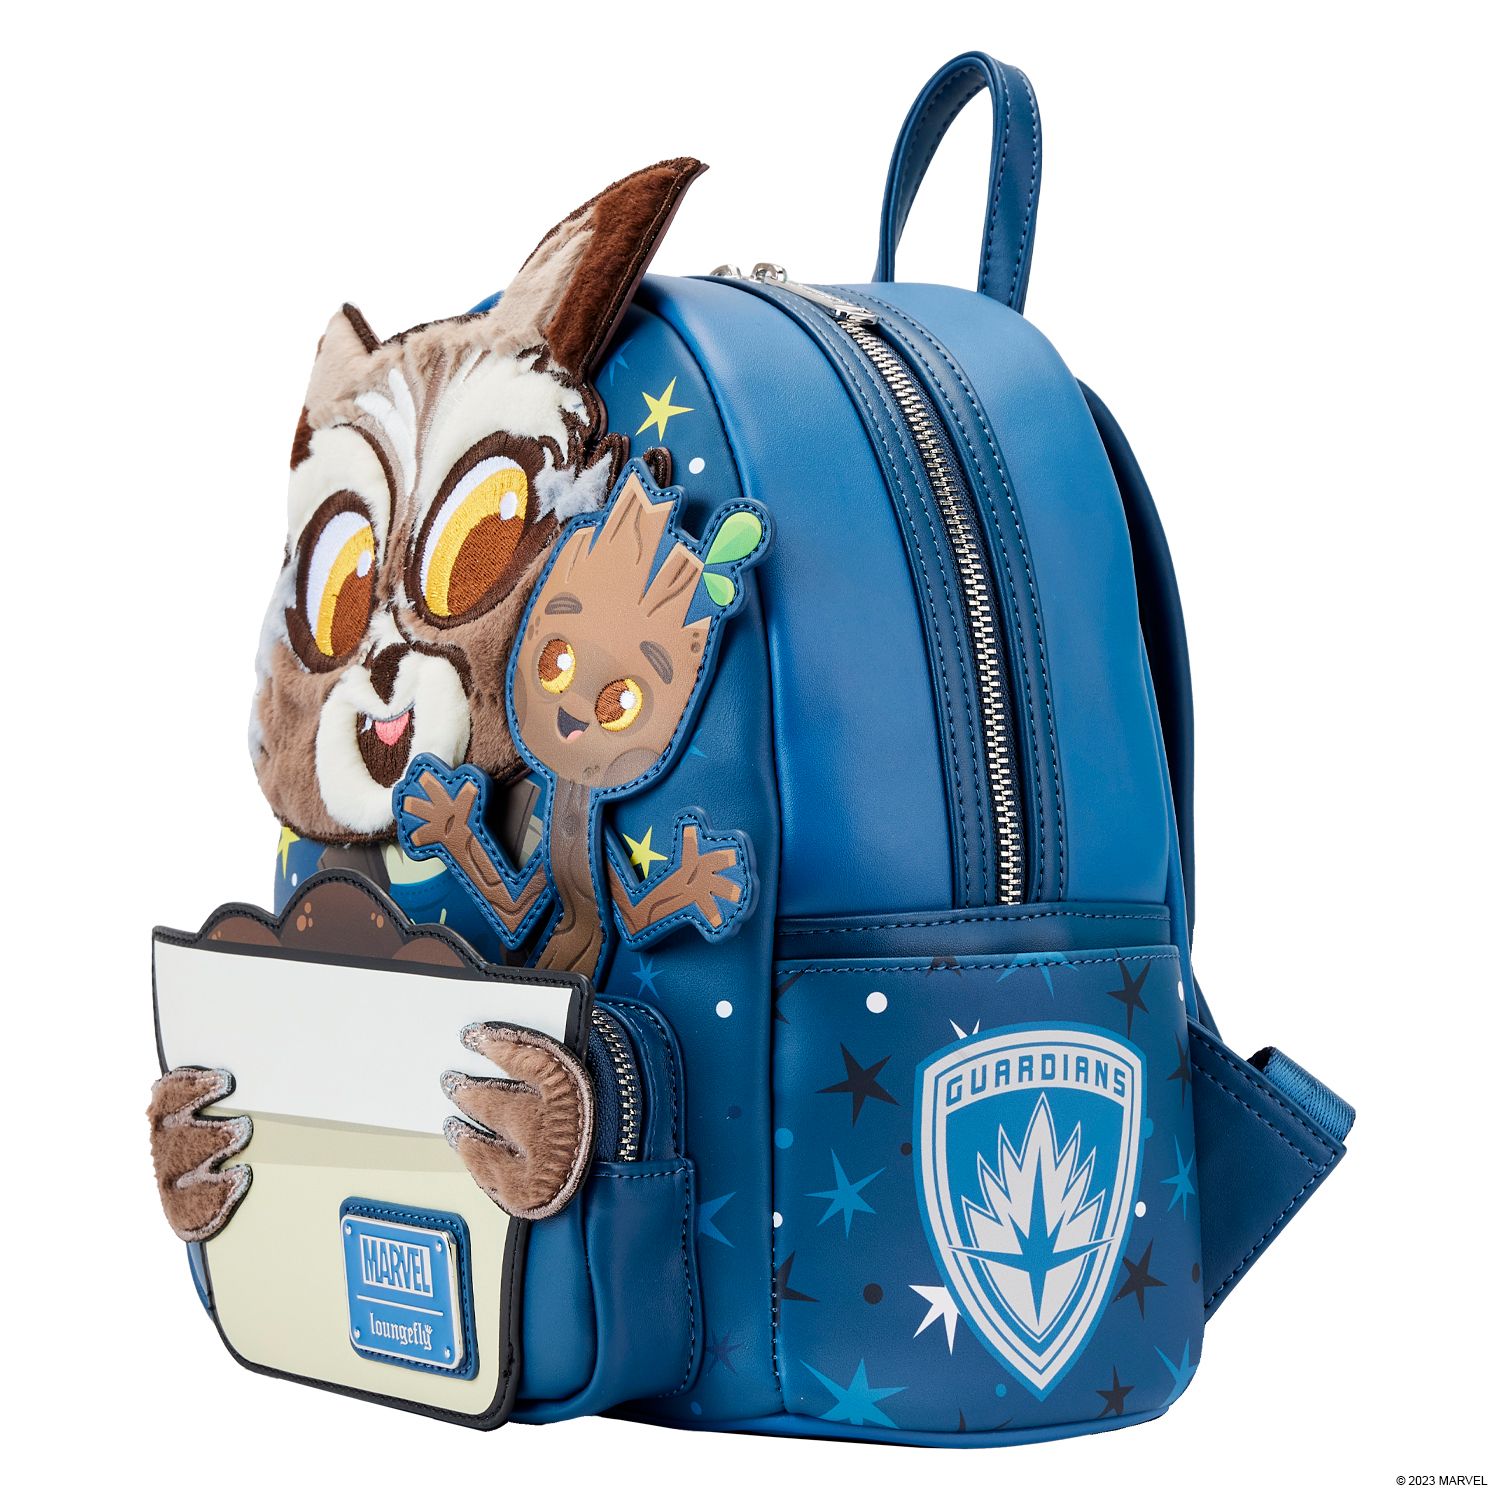 Ahsoka Loungefly Bag Exclusively Available at San Diego Comic Con